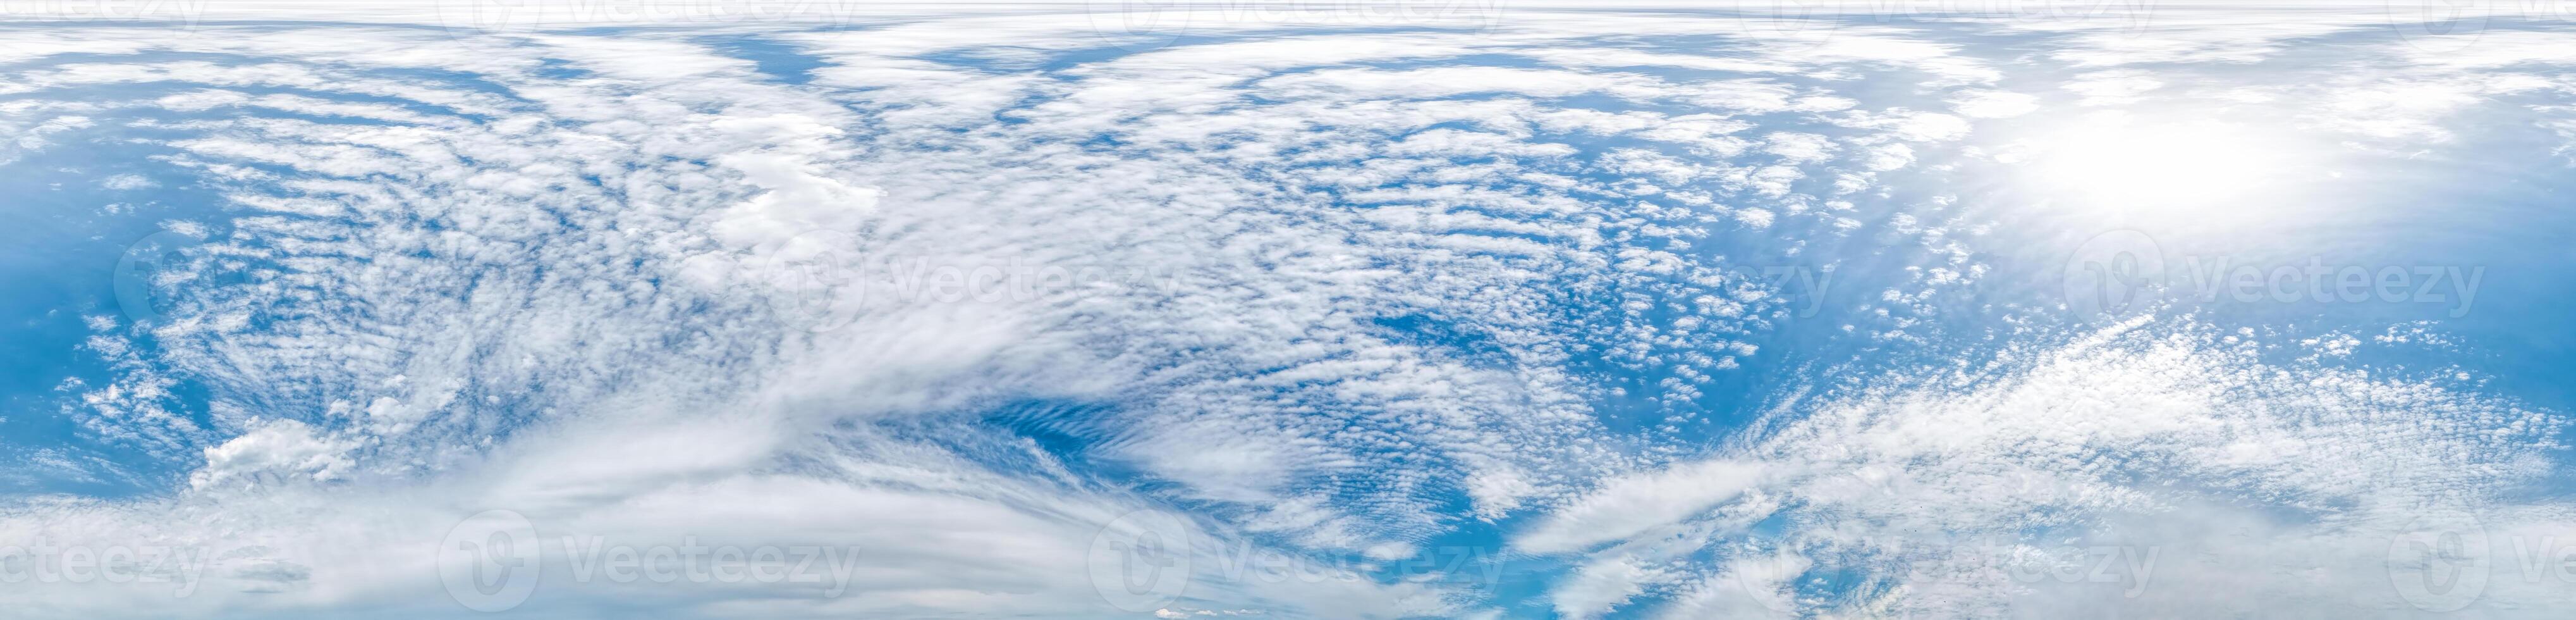 Blue sky with light clouds Seamless panorama in spherical equirectangular format with complete zenith for use in 3D graphics, game and for composites in aerial drone 360 degree panoramas as a sky dome photo